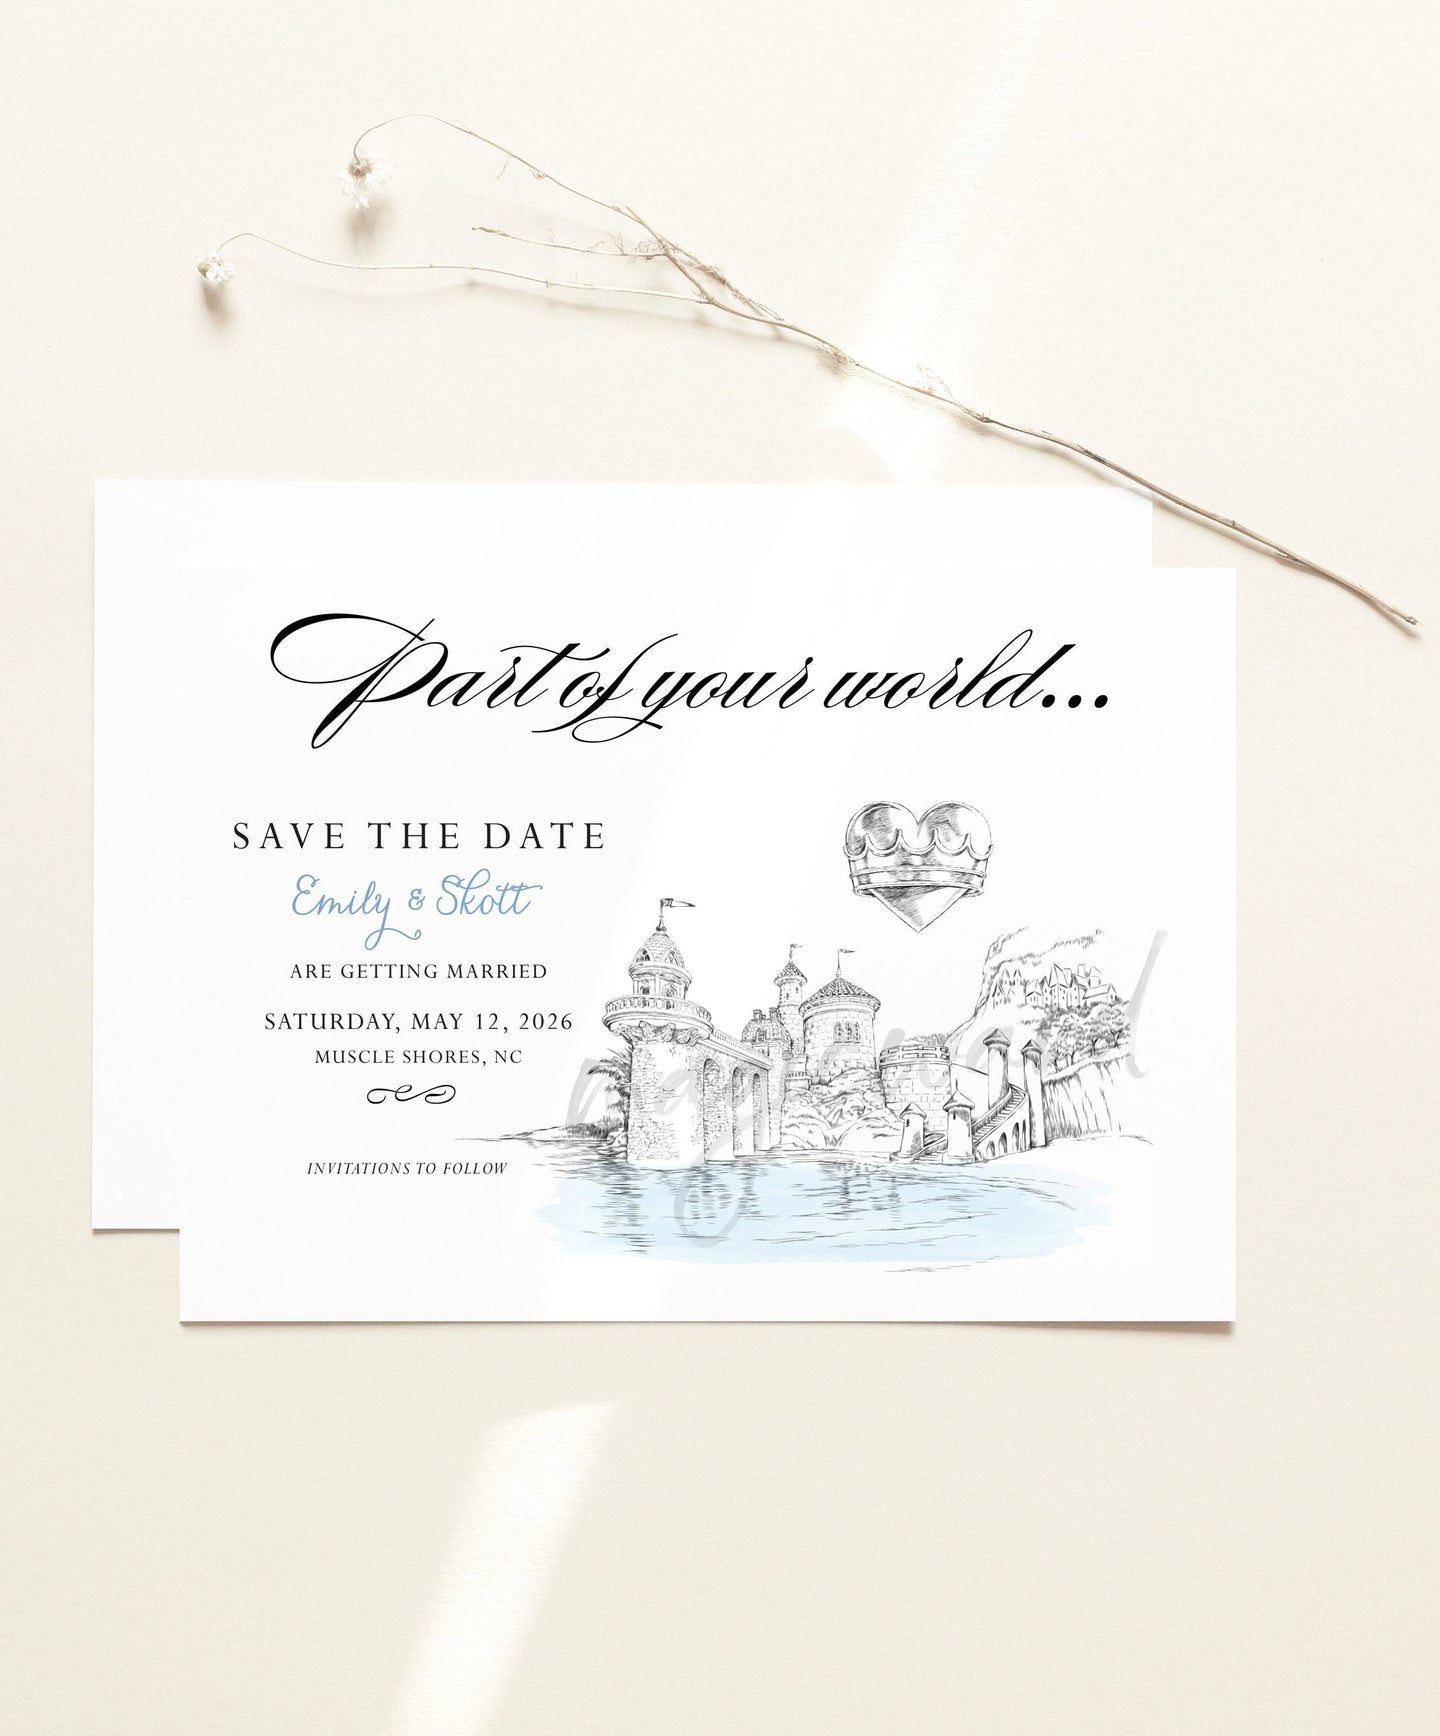 Little Mermaid Save the Dates, Save the Date, Disney Inspired, STD, Under the Sea Wedding Fairytale Wedding Save the Date Cards